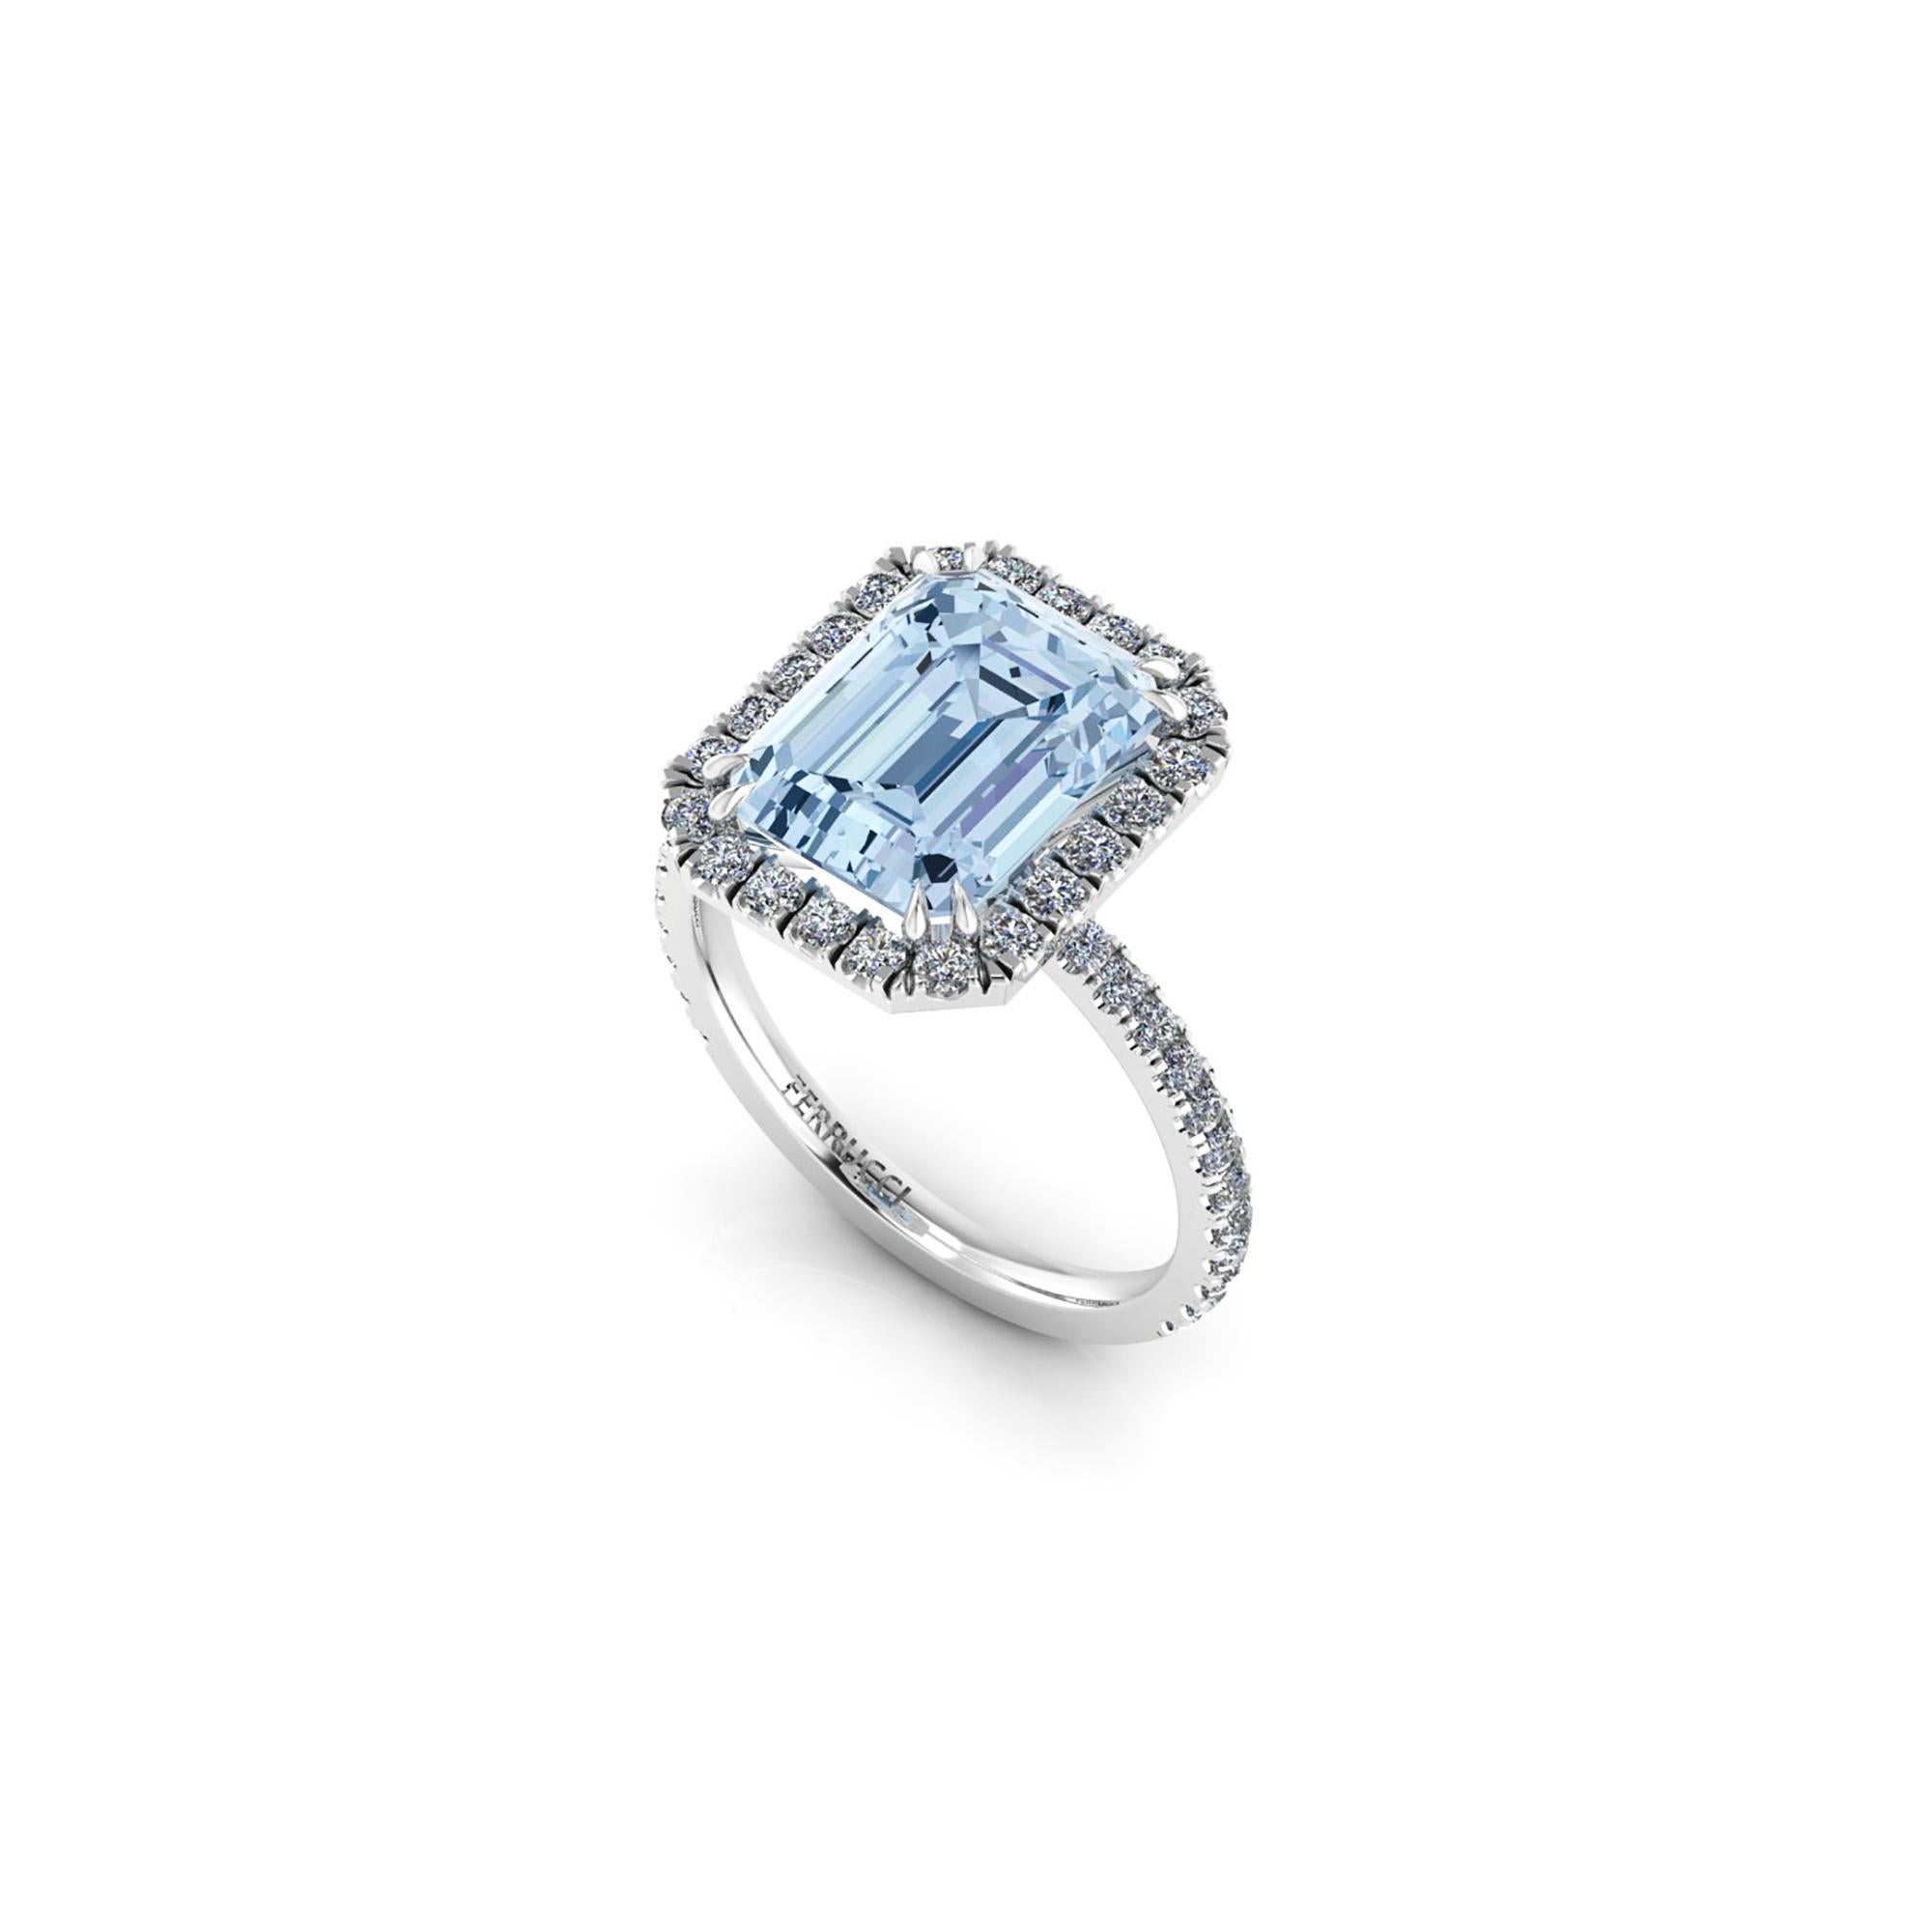 An exquisite 4.54 carat Aquamarine, emerald cut, very high quality color, eye clean gem, set with double claw prongs, embellished by a Halo of bright diamonds of approximately  total carat weight of 0.65 carat, set in an hand crafted, delicate and